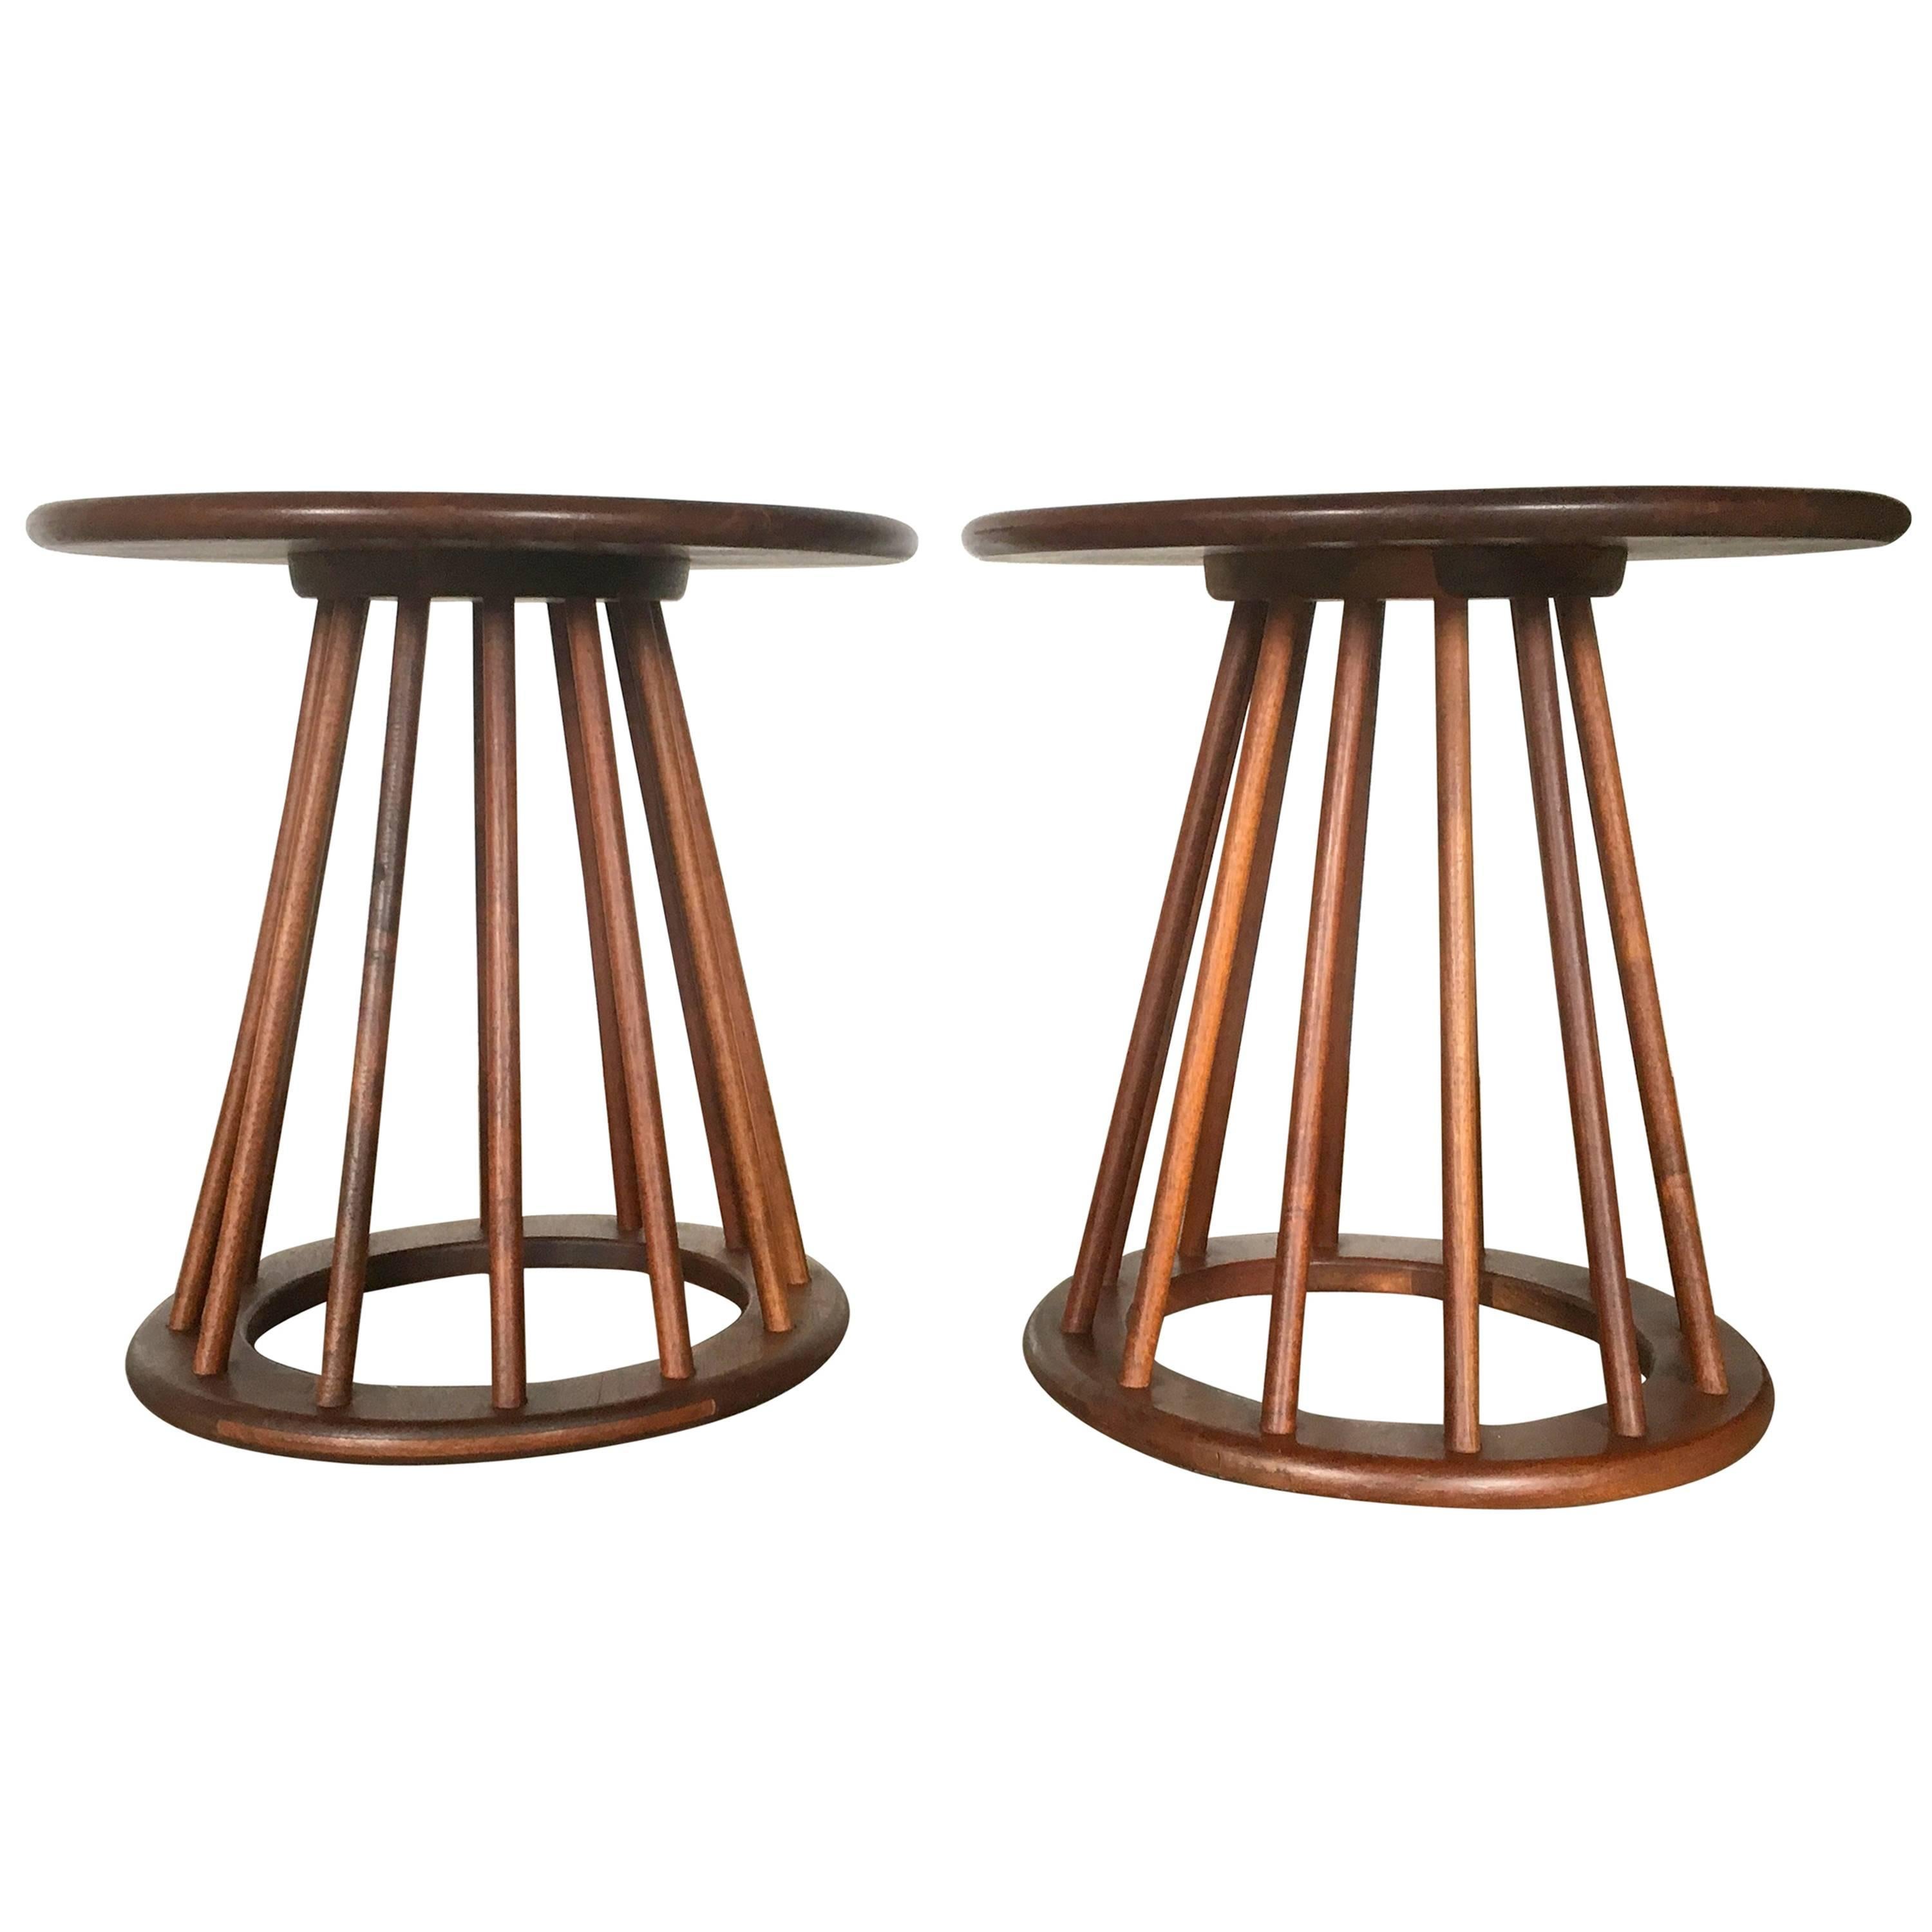 Stunning Pair of Arthur Umanoff Spindle End Tables